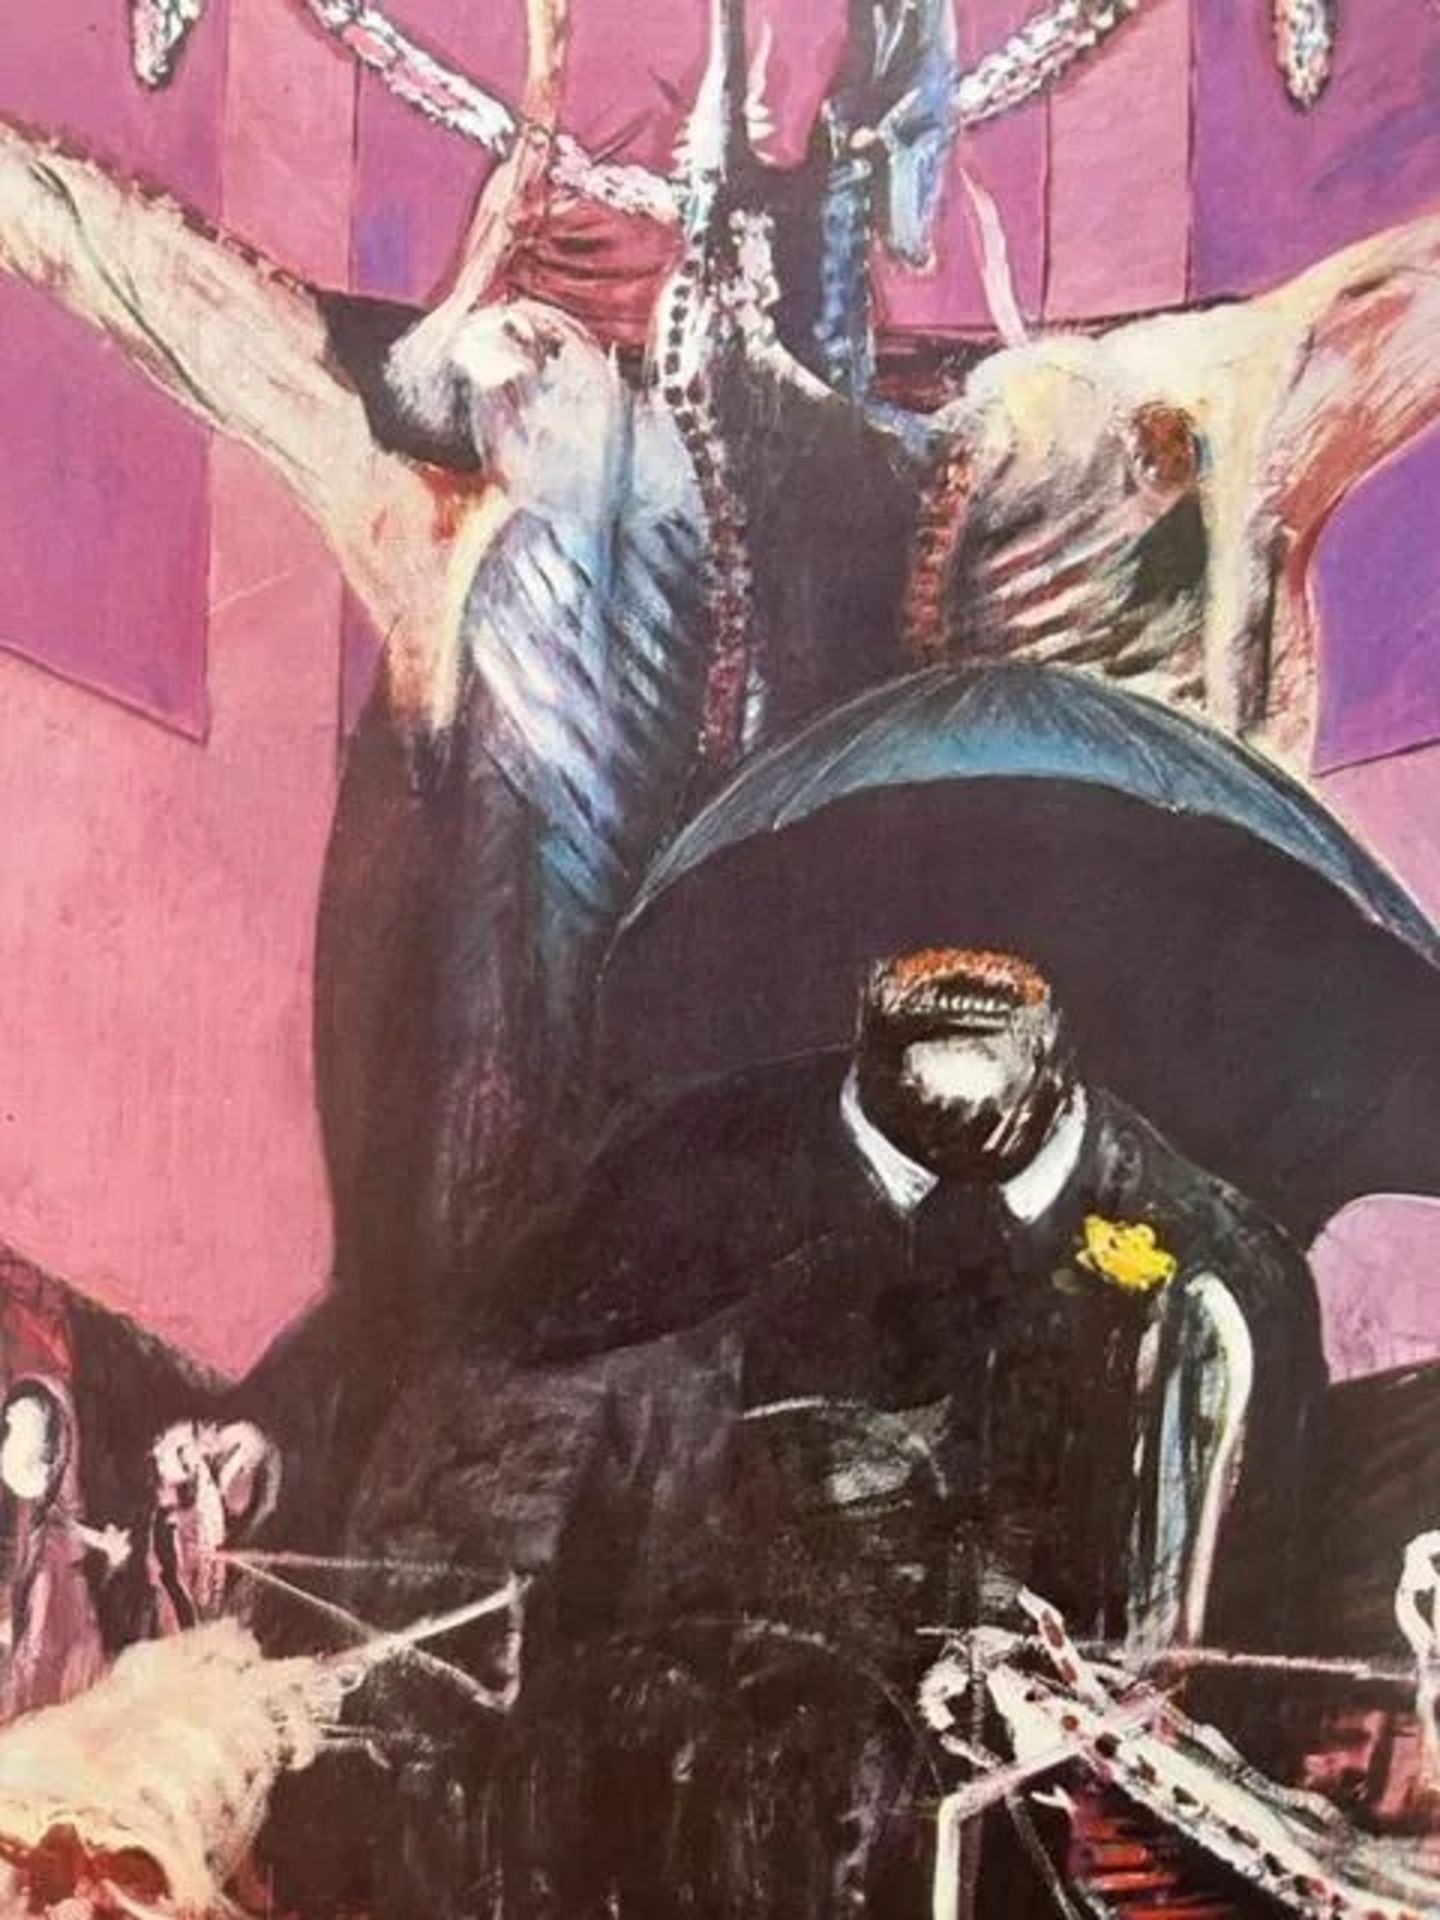 Francis Bacon "Pink Crucifiction" Print - Image 3 of 6